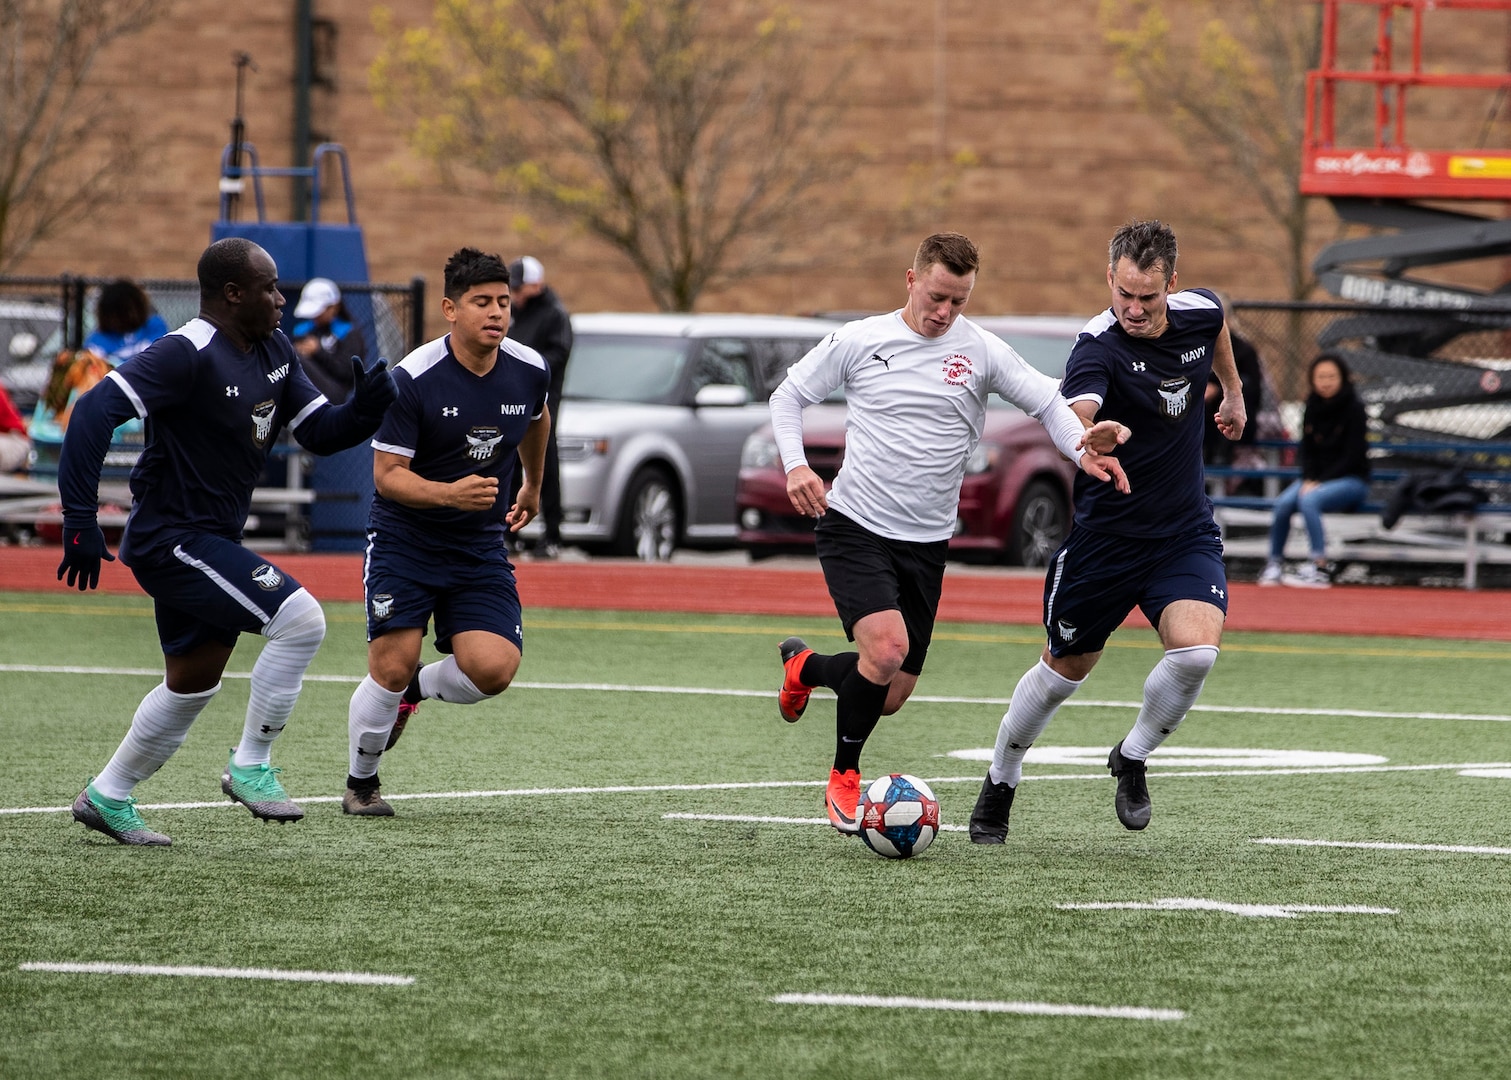 NAVAL STATION EVERETT, Wash.  (April 20, 2019) Marine Lance Corporal Nicholas Heath of Camp Lejeuene led the competition with five goals of the 2019 Armed Forces Men's Soccer Championship held at Naval Station Everett, Wash. from 14-20 April, featuring Service members from the Army, Marine Corps, Navy (including Coast Guard) and Air Force. (U.S. Navy photo by MC2 Ian Carver/Released)